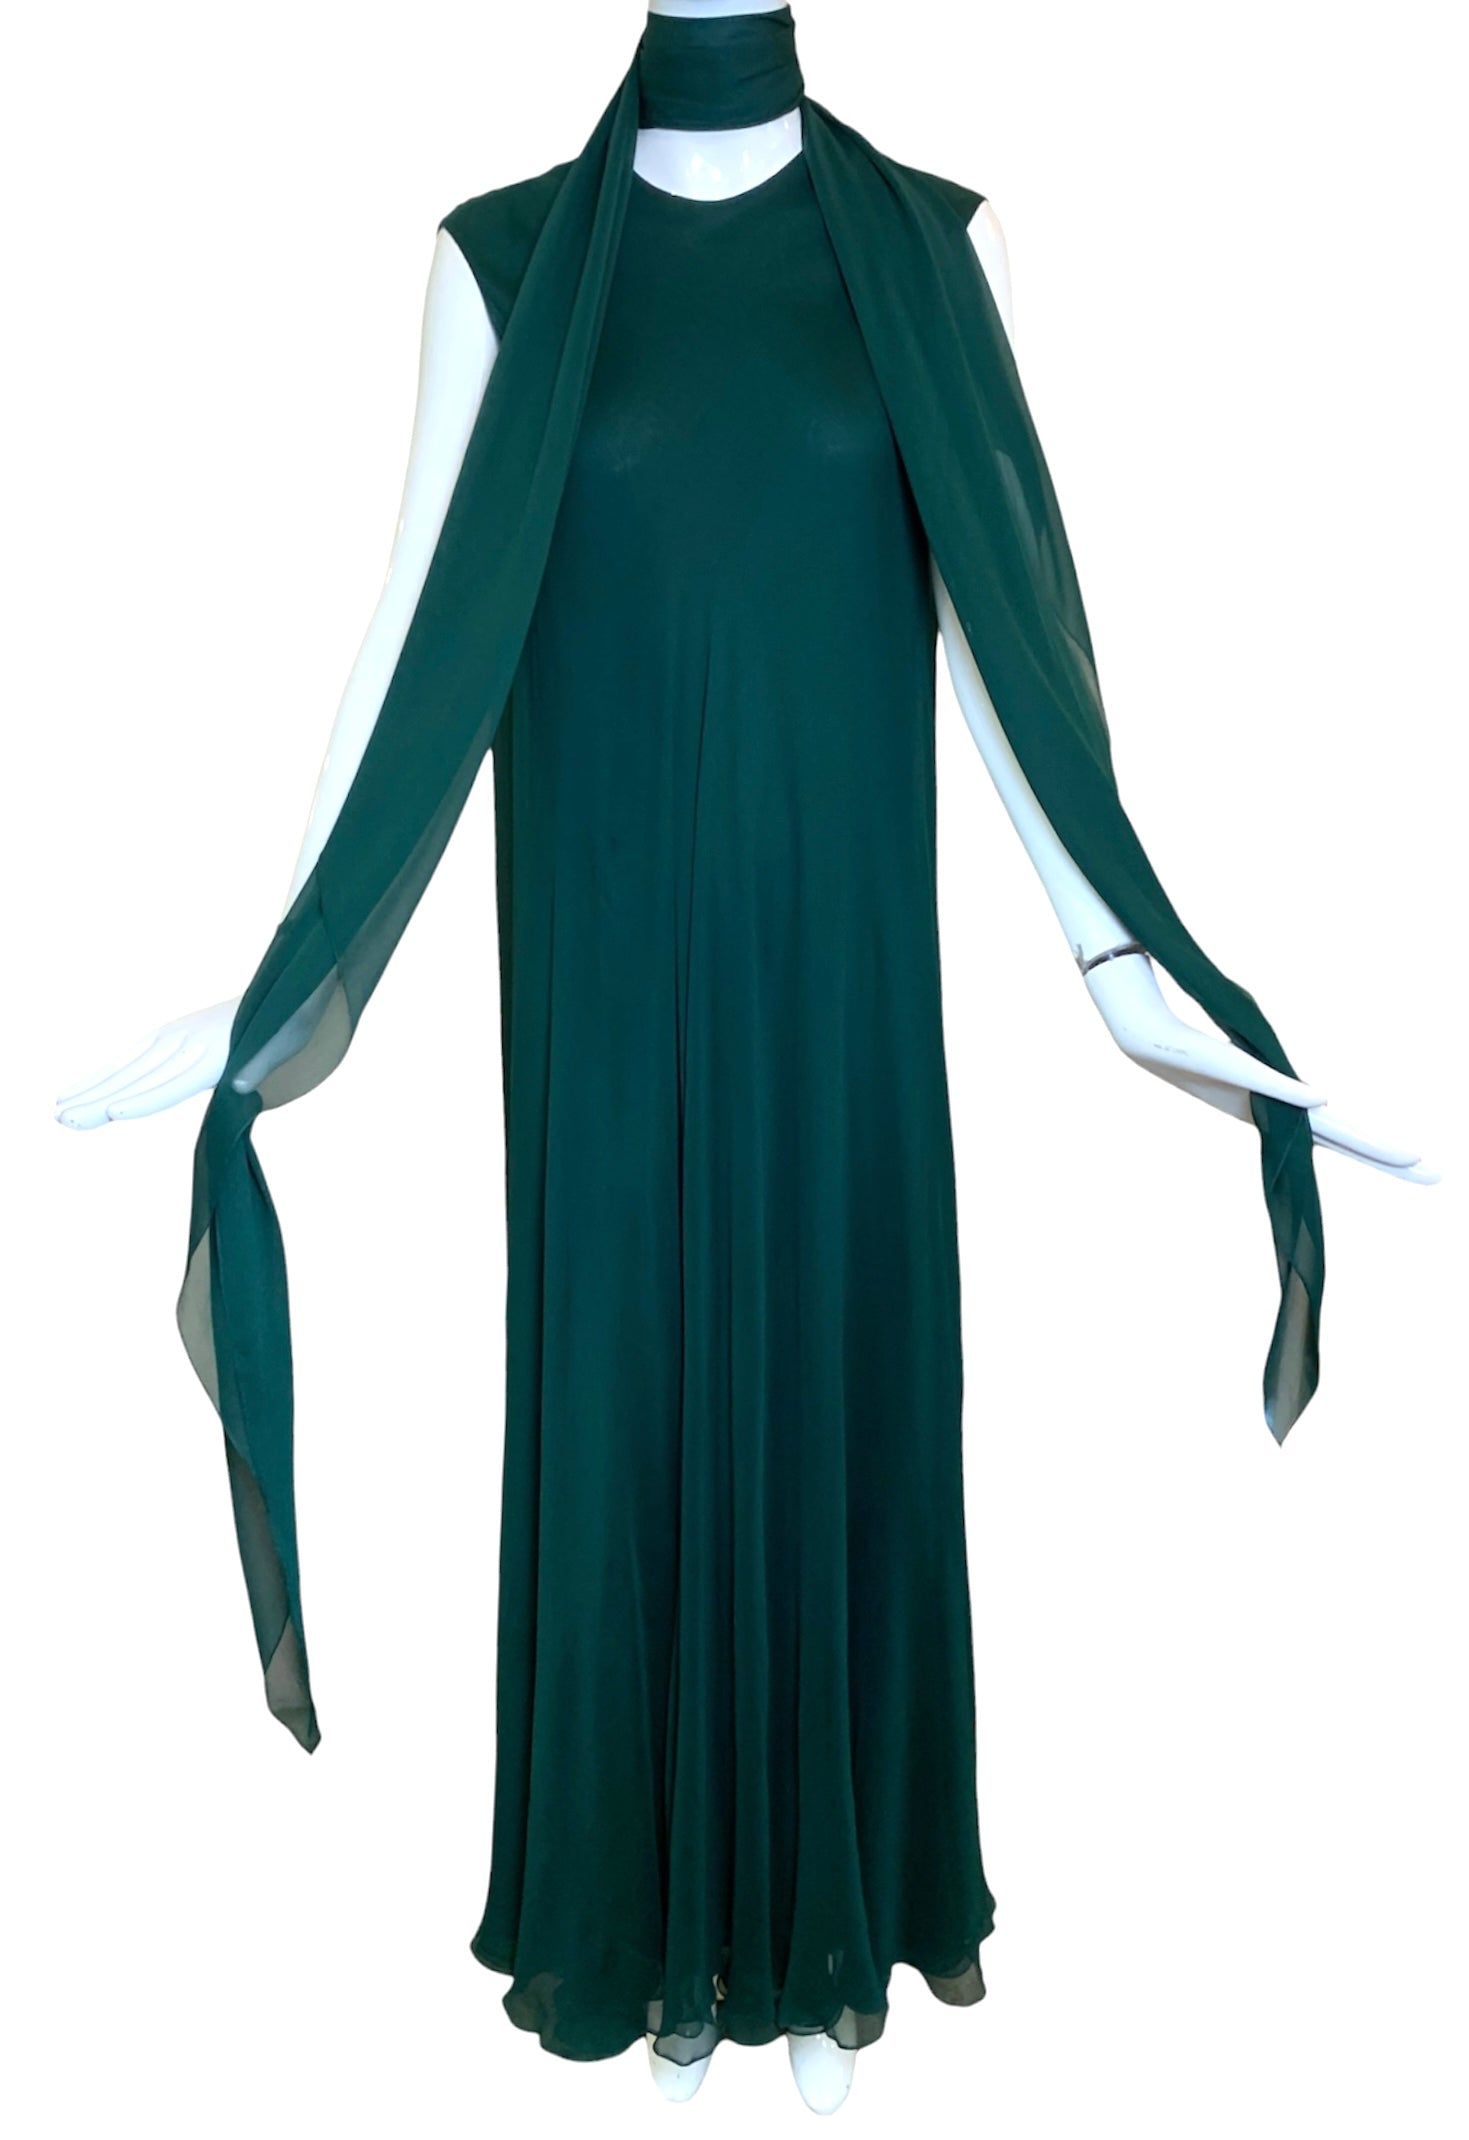 Stavropoulos '70s Emerald Green Silk Chiffon Gown & Scarf at throat